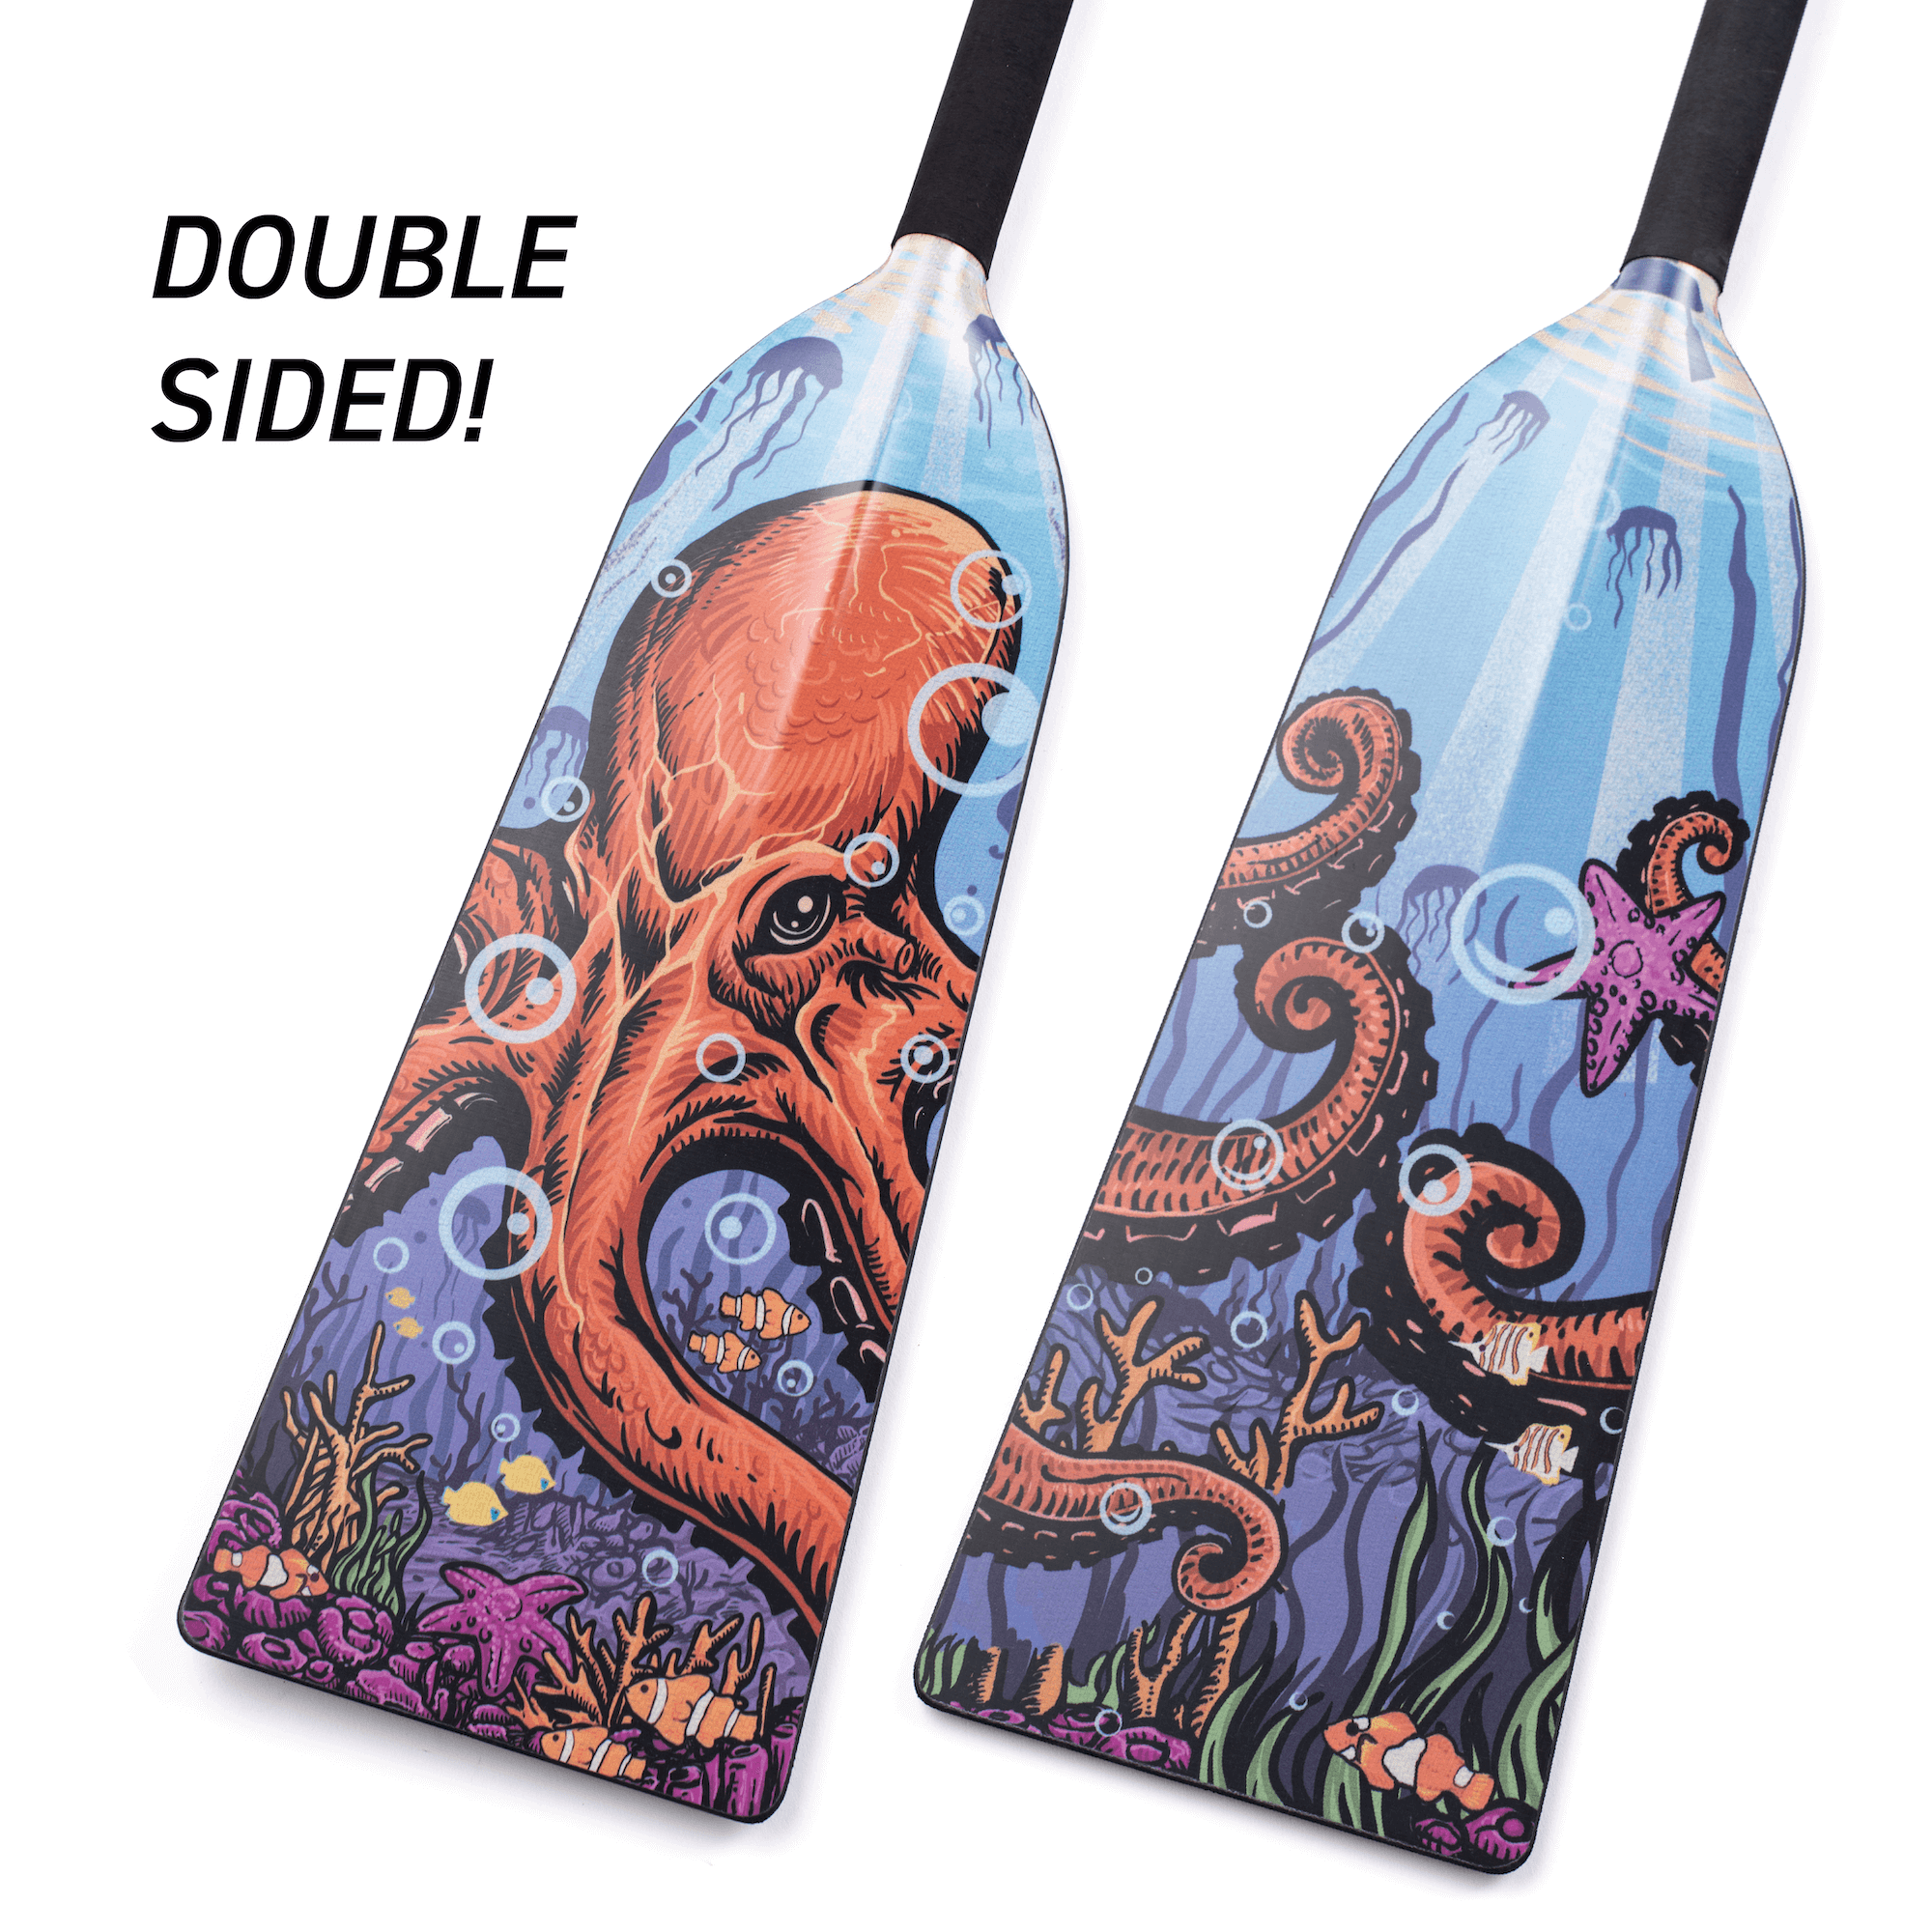 CLEARANCE- Factory Seconds: Kraken X26 Sting+ Adjustable Dragon Boat Paddle